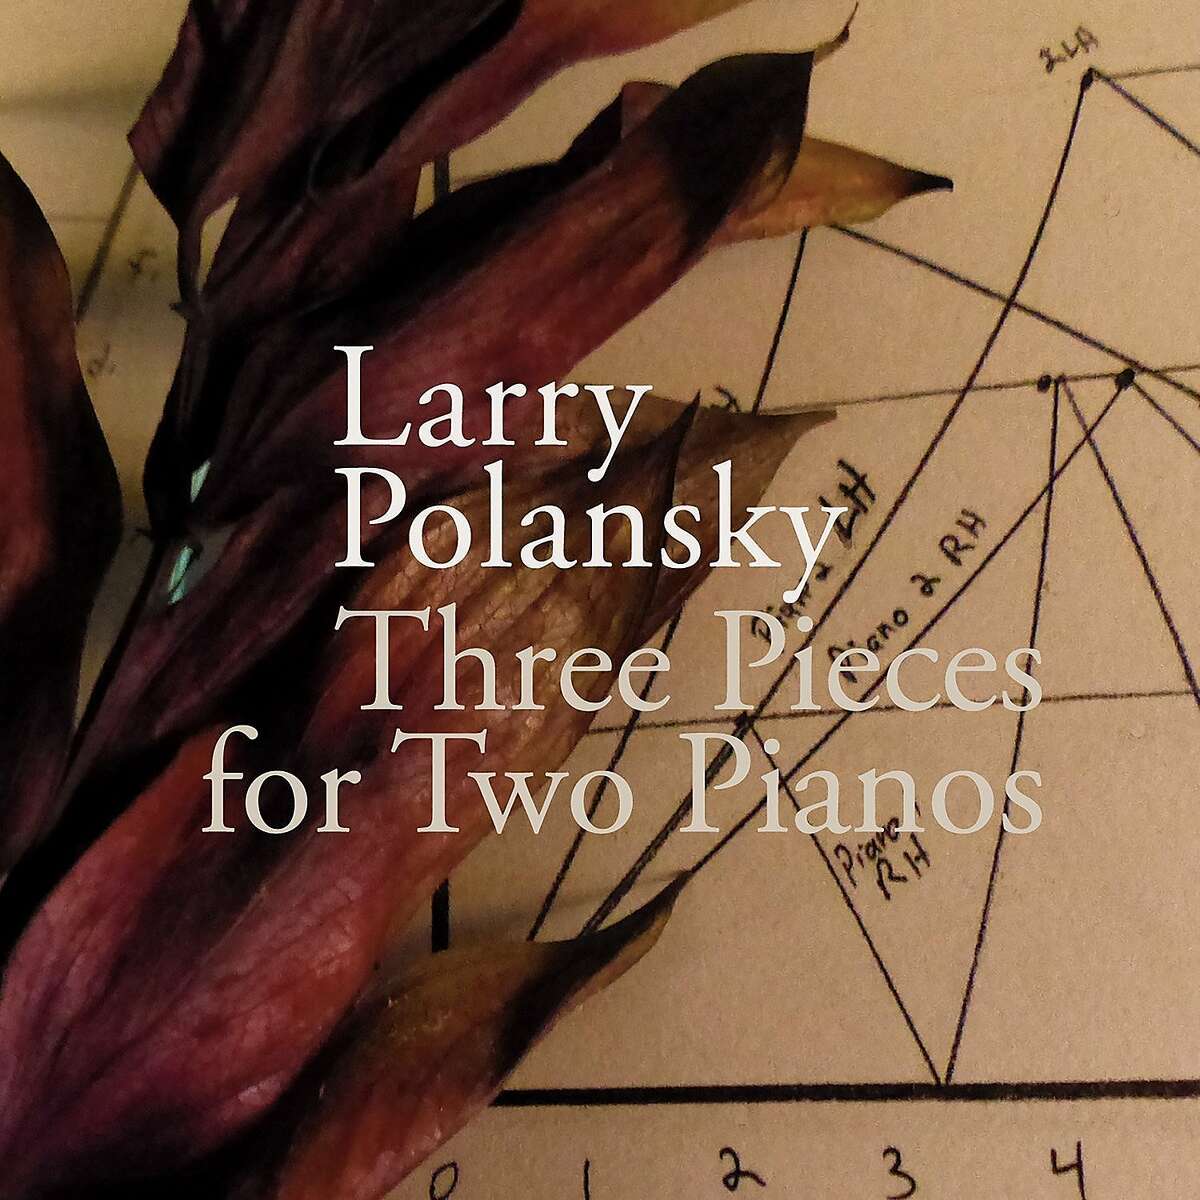 Larry Polansky, Three Pieces for Two Pianos